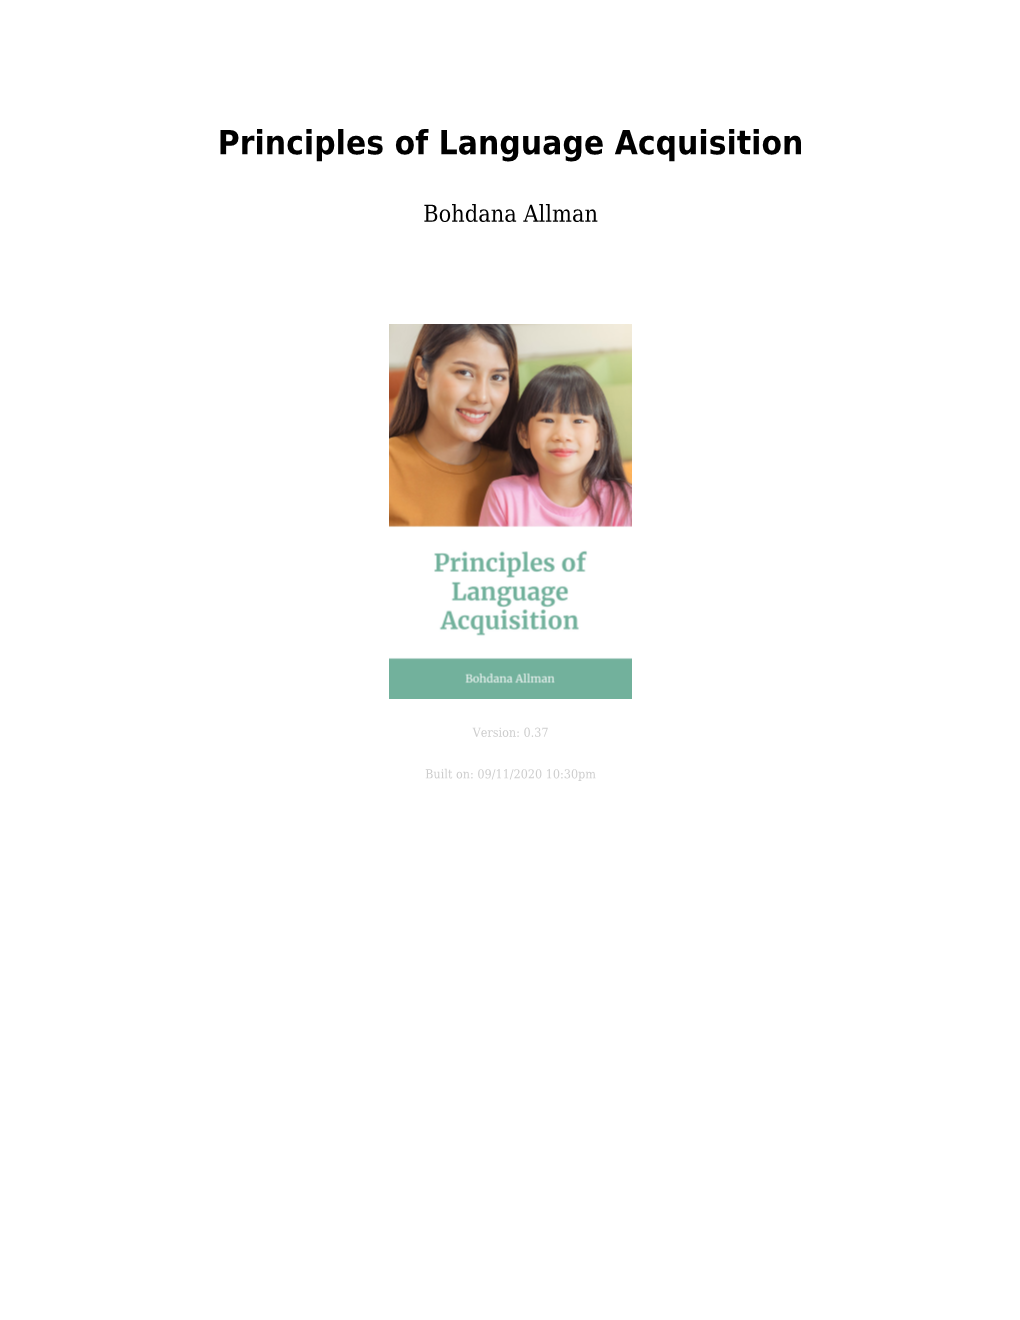 Input and Second Language Acquisition